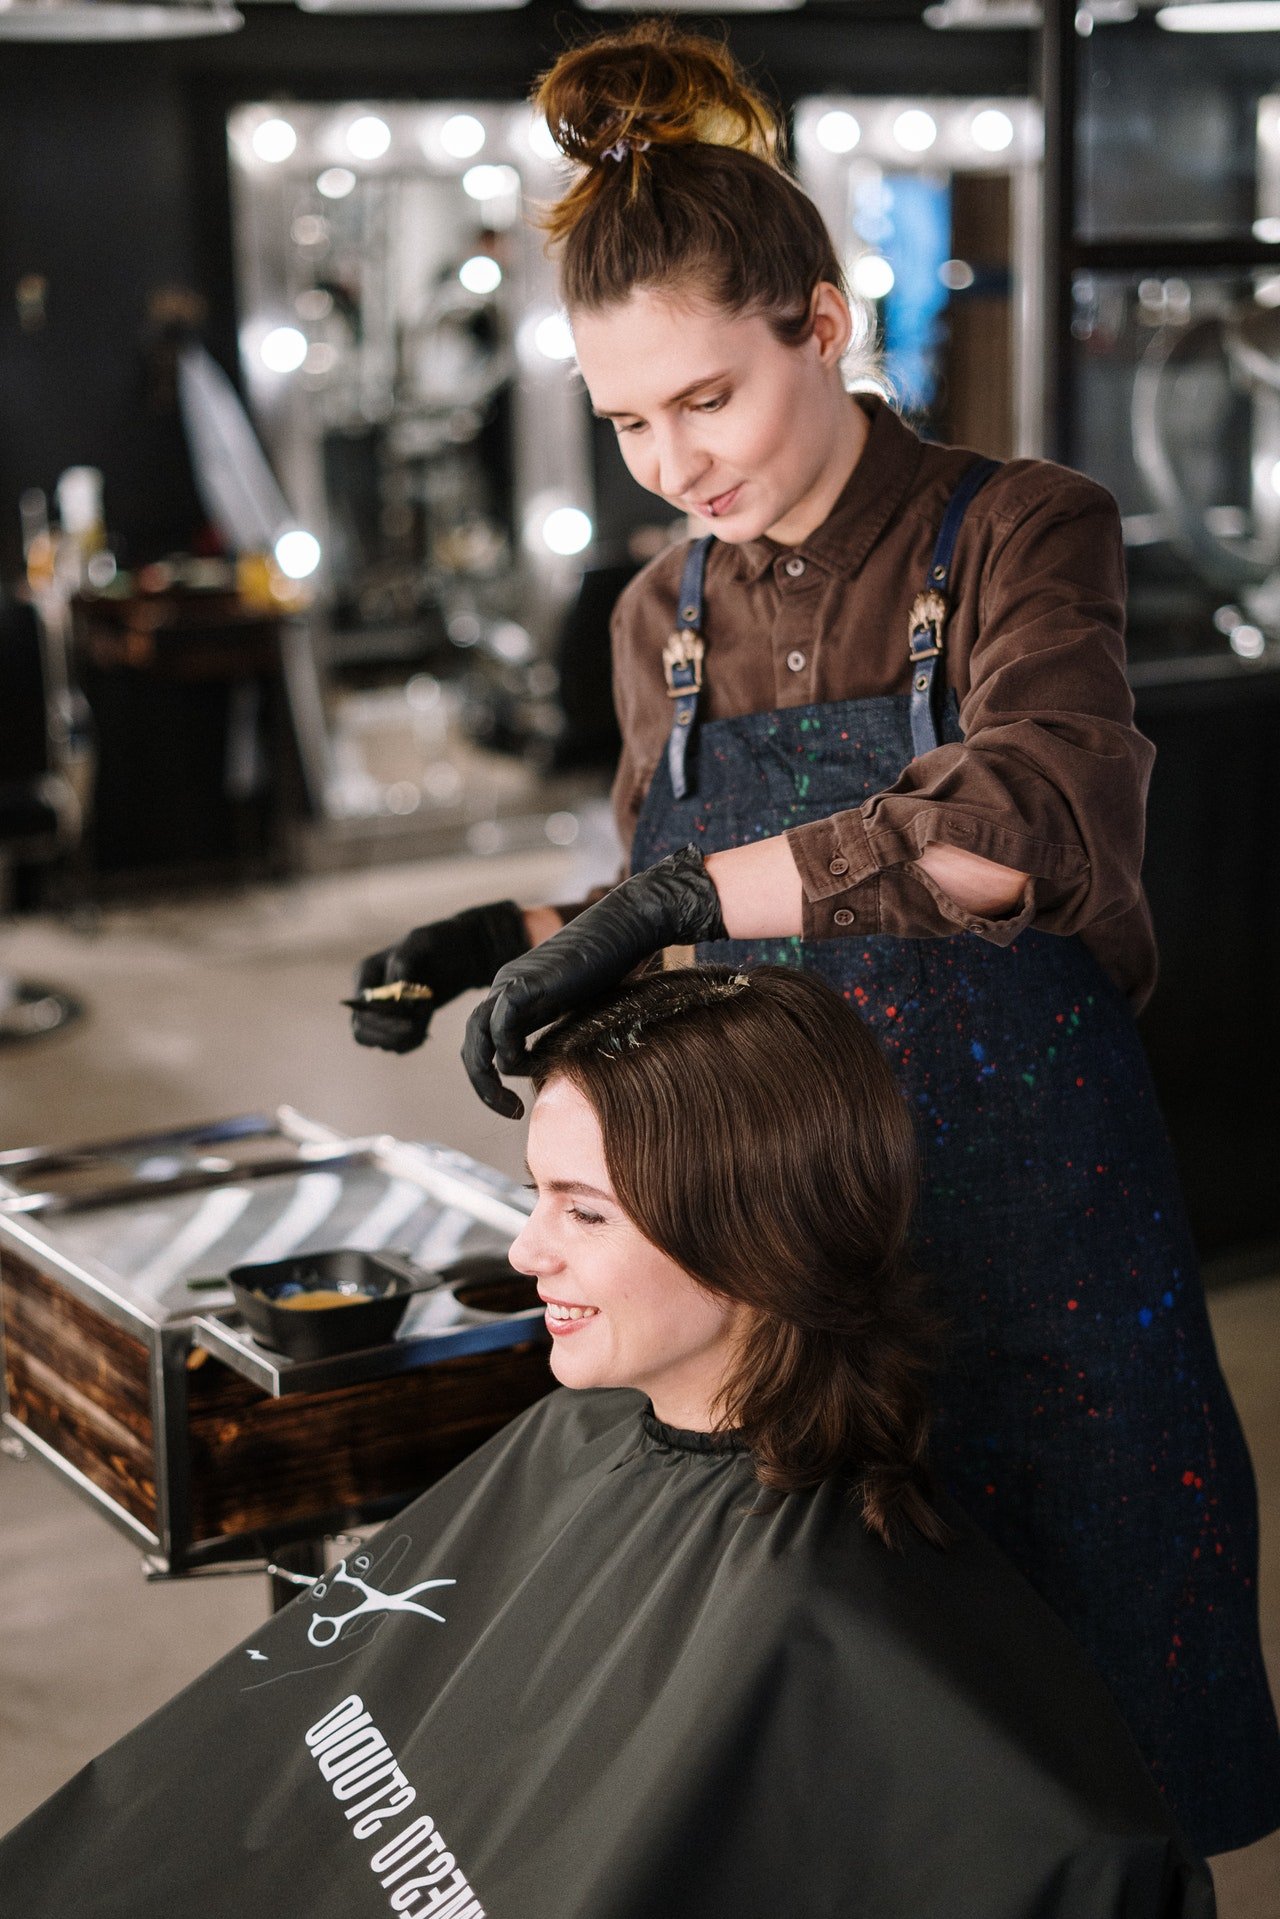 Hairdresser working on woman's hair | Photo: Pexels